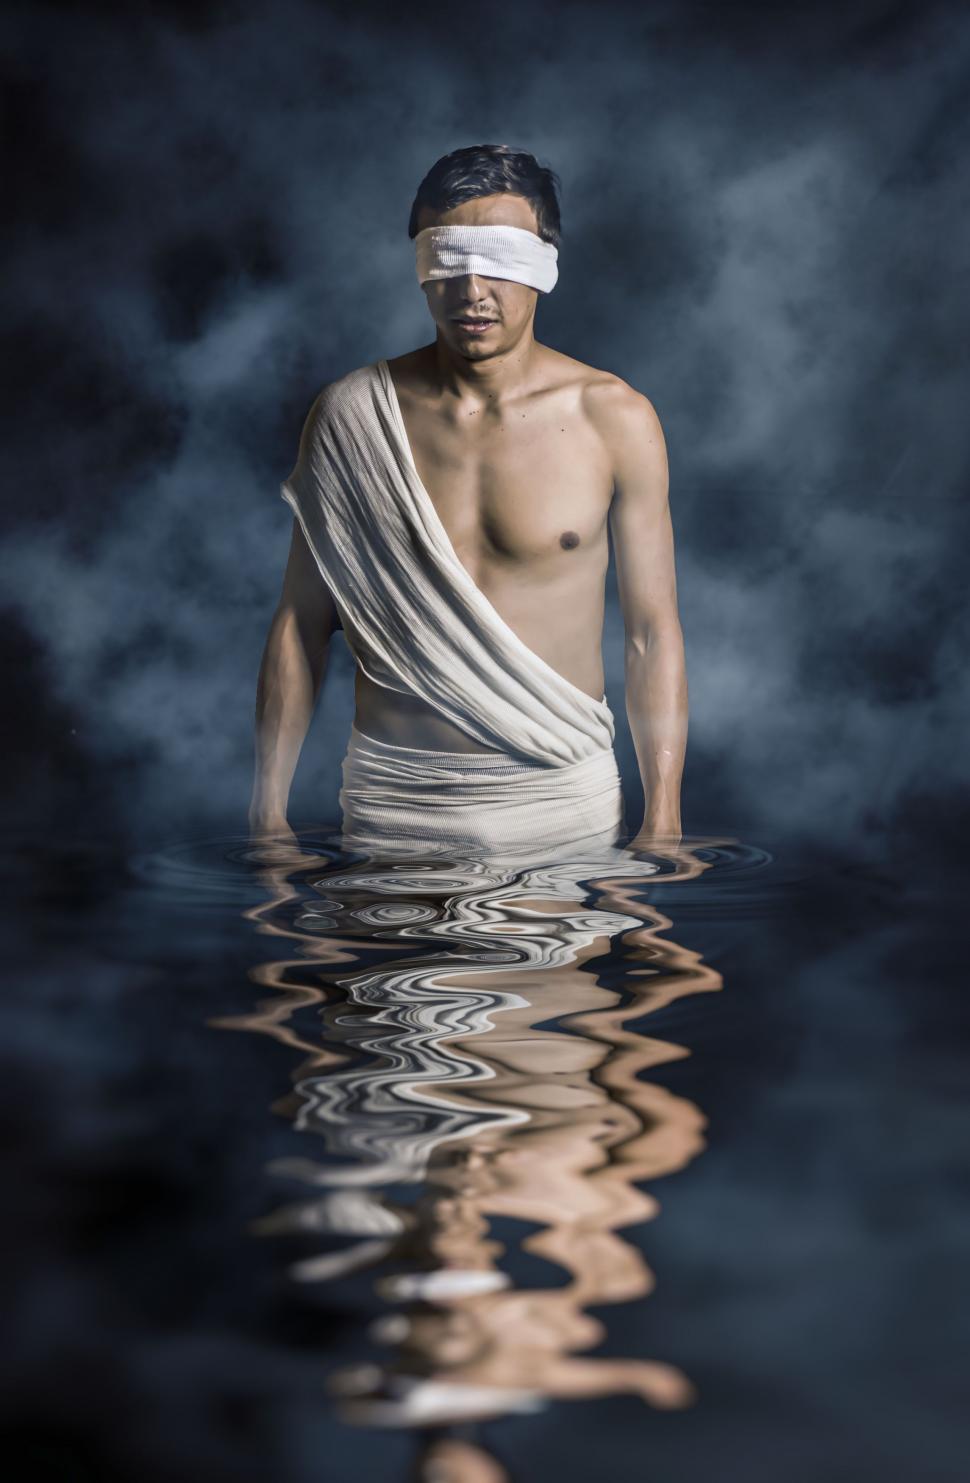 Free Image of Blindfolded Man Standing in Water 